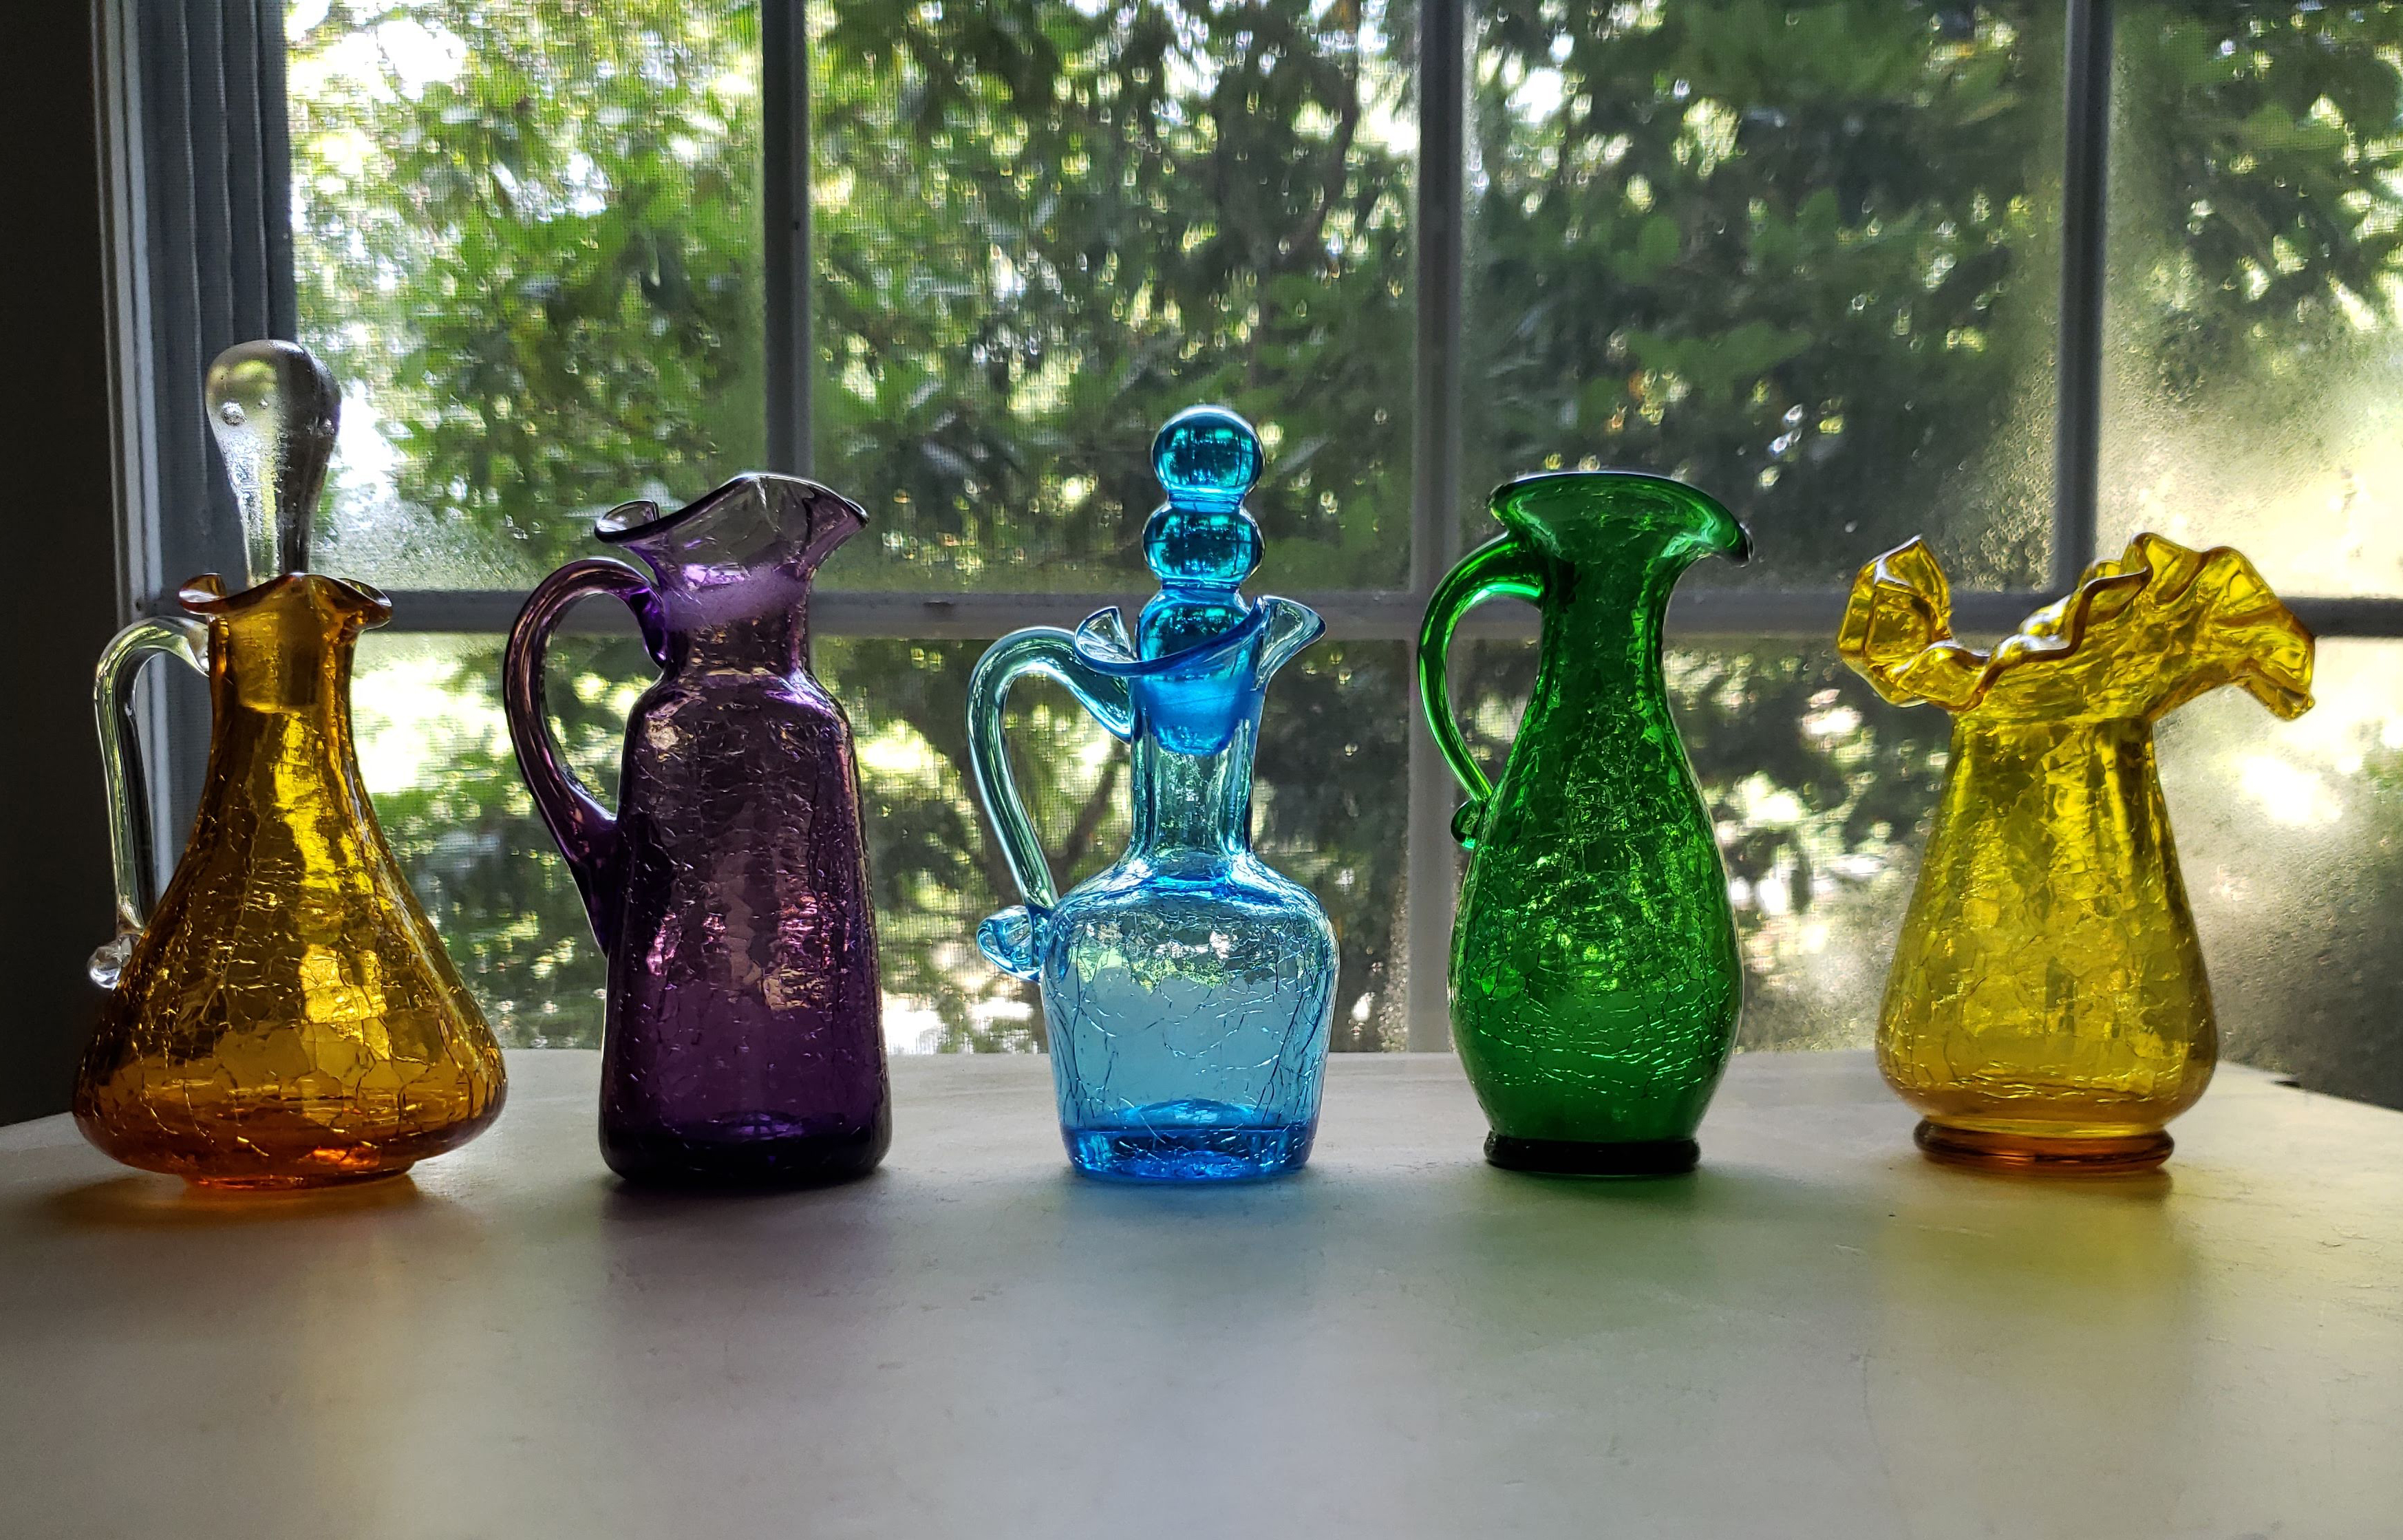 https://serstyle.com/wp-content/uploads/2018/08/Collection-of-Multi-Colored-Crackle-Glass-Pieces-group-1.jpg